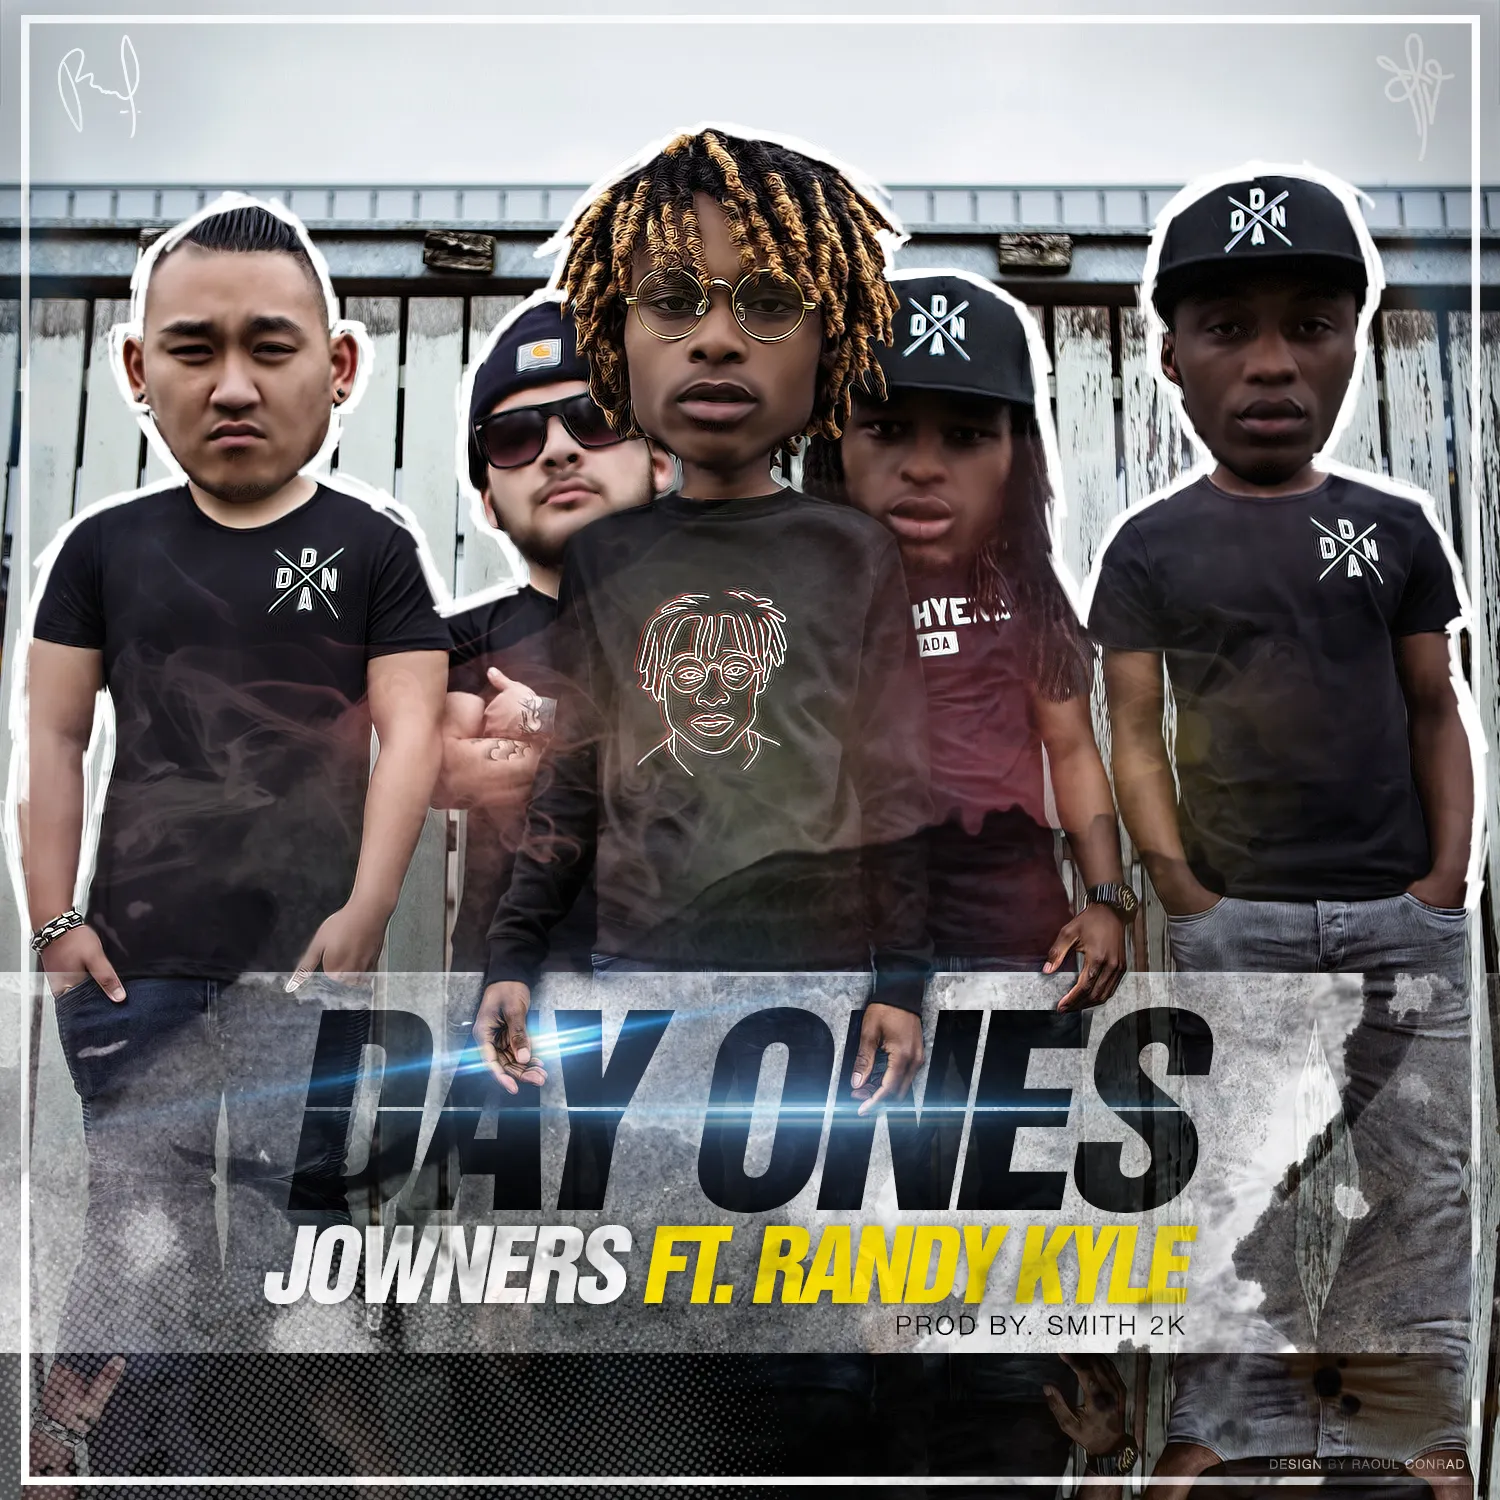 Dayones Jowners